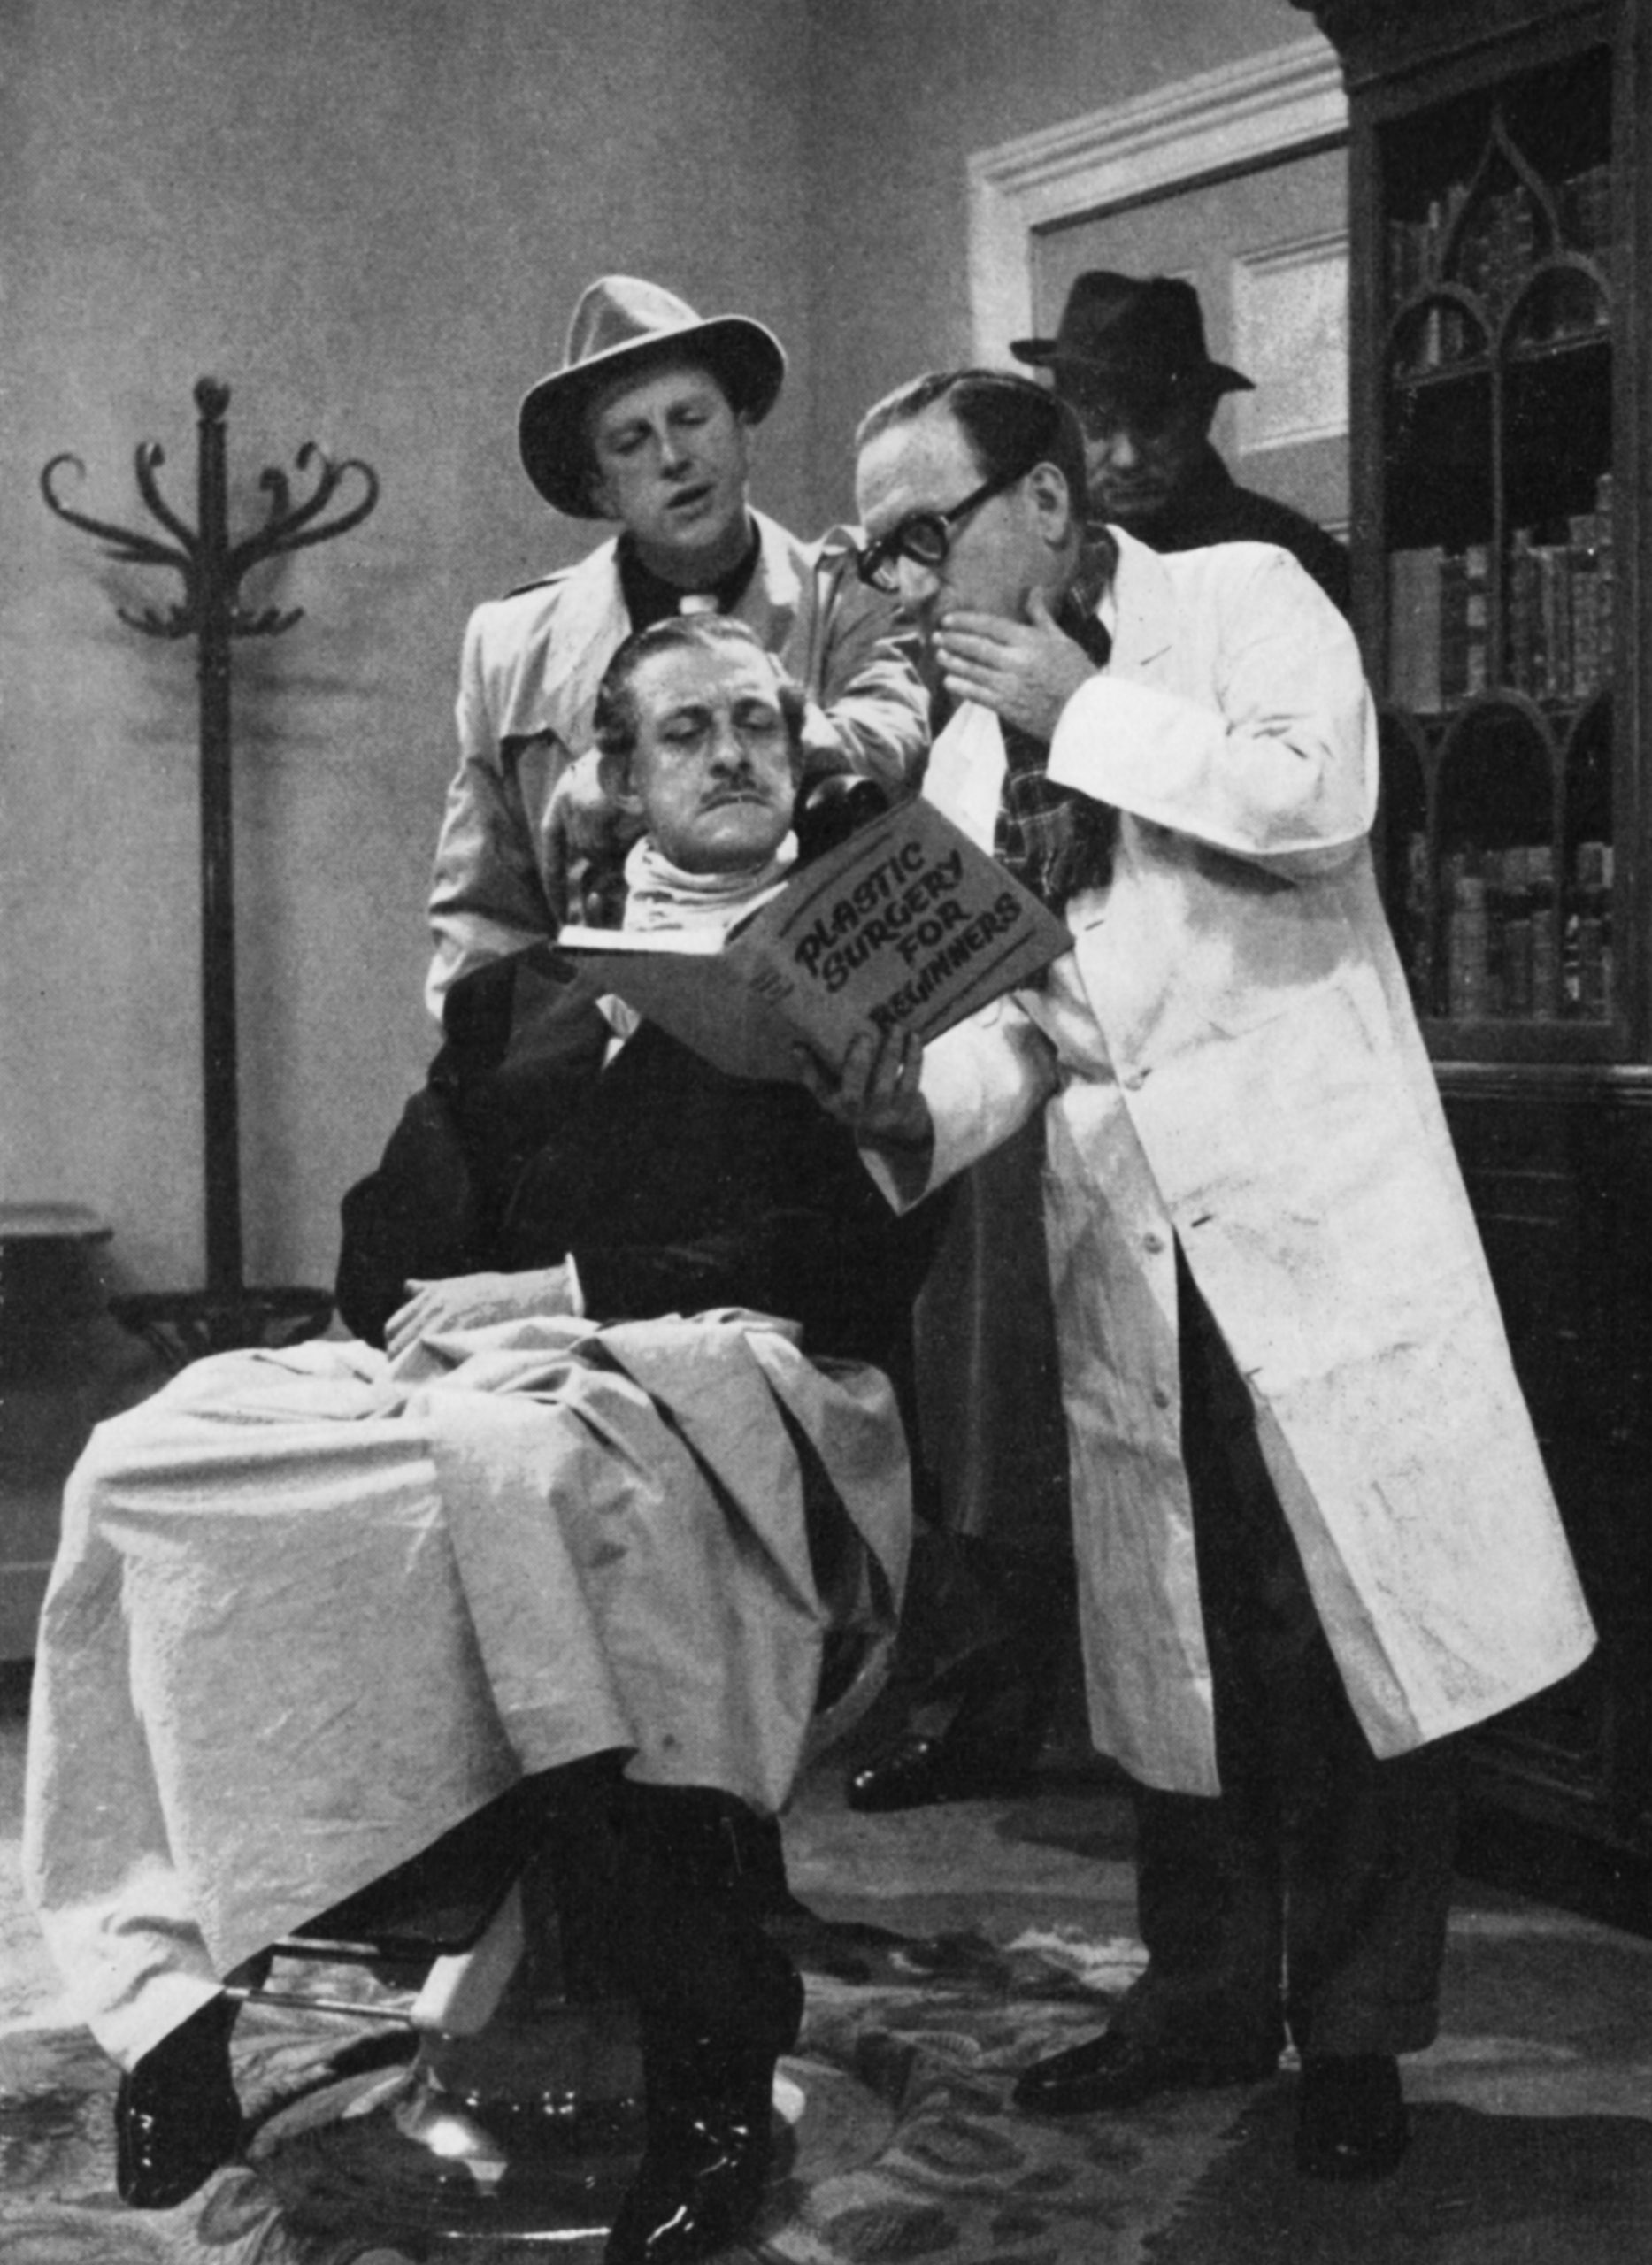 Leslie Mitchell in a doctor's chair with Arthur Askey looming over him with a book entitled "PLASTIC SURGERY FOR BEGINNERS"